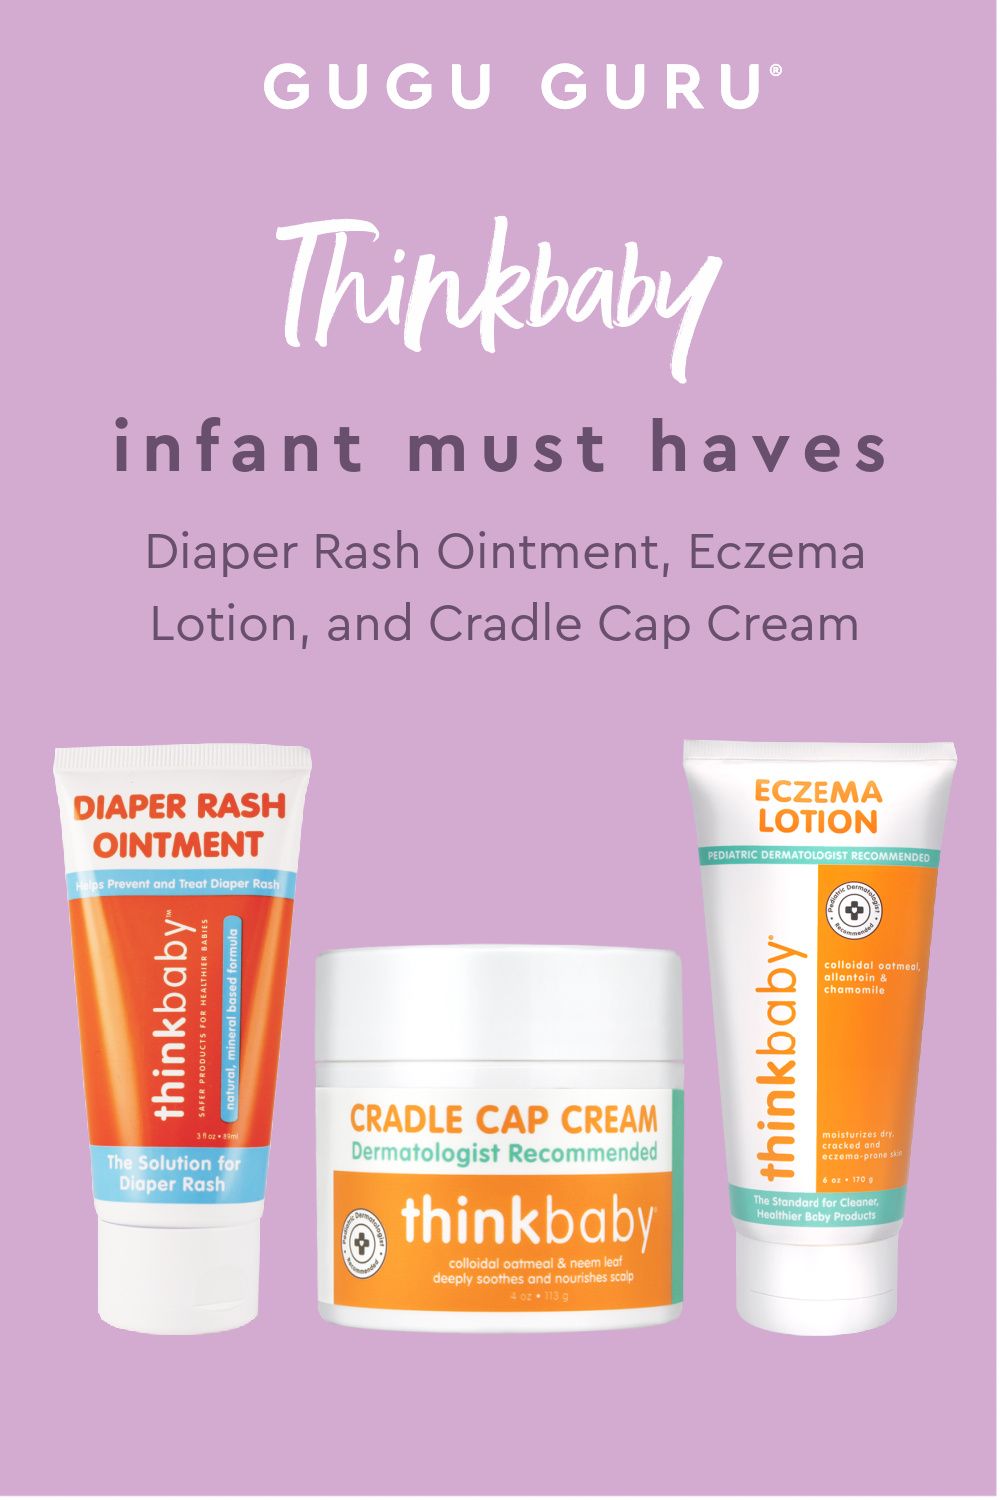 Thinkbaby infant must haves in 2021